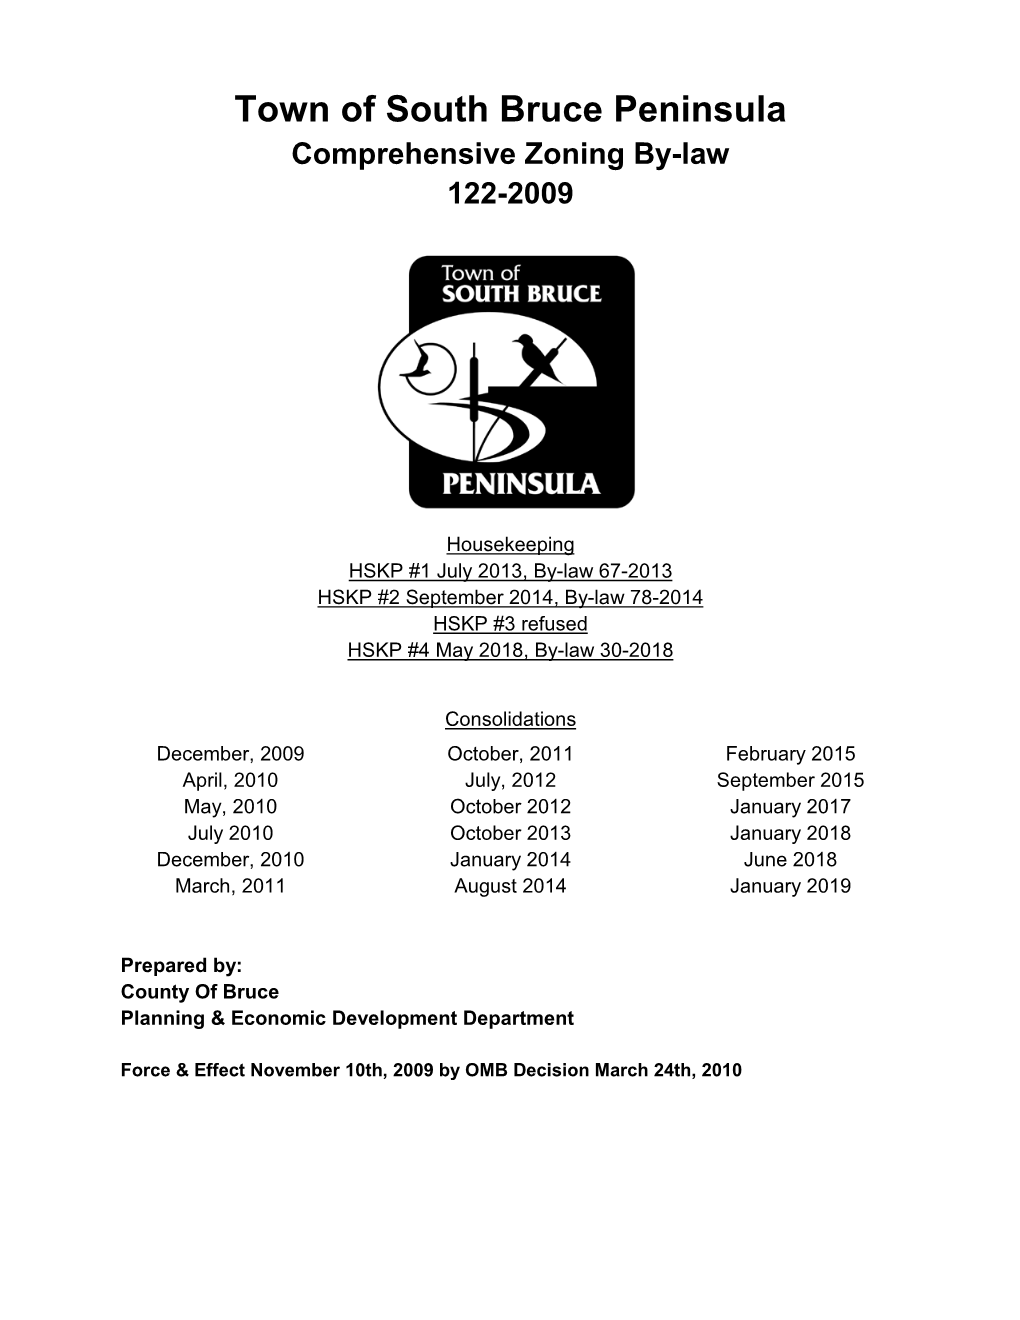 Town of South Bruce Peninsula Comprehensive Zoning By-Law 122-2009